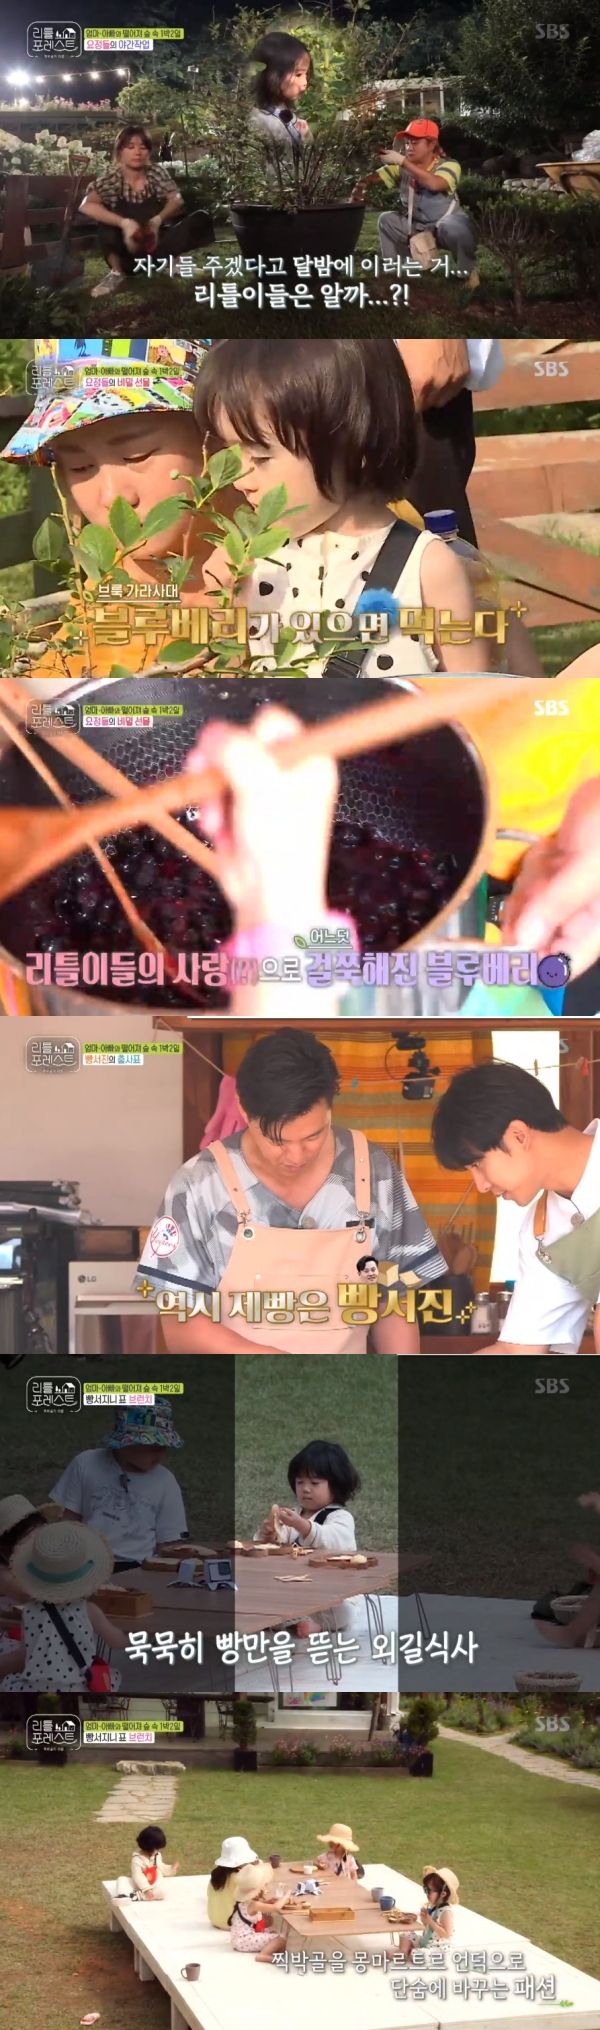 Littleies in The Treasure Seekers ran for the final hint.On SBS Little Forest broadcast on the 16th, Park Na-rae, Lee Seo-jin, Lee Seung-gi and Jung So-min made blueberry jam with Little and appeared in The Treasure Seekers.On the day of the show, Brooke said, If you have blueberries, you eat. Brooke tasted the ingredients before making jam. Where is the blueberry fairy?Jung So-min said, Brook comes out while he is asleep.To them, Lee Seung-gi told them to make jam; Littley stirred a bowl of blueberries; towards the finished jam, Lee Seung-gi said, Its handmade jam.Its more than visuals I thought. Liddle ate jam made by Lee Seo-jin on baked bread.After snacking, Park Na-rae said we should find Treasure that we have prepared.Park Na-rae said, I did The Treasure Seekers in the city. He kept things in his pocket and let Little people find them.The Littles, who went to the tree house, laughed and ran on the dirt floor, and Lee played in The Treasure Seekers.Jung So-min and Lee Seung-gi took Eugene, Brookes hand and went into the secret forest to find the second Treasure.First, Eugene pointed to Treasure, and then Brooke found Treasure hanging from the tree.Finally, the last Treasure. Lee Seung-gi said to the running Littleies, The last hint is Uncle Mistari, the hint is in the kitchen.Looking for shelter to avoid this, Lee Seo-jin left the kitchen and went into the house.Littles found Lee Seo-jin and give me the Treasure Seekers hint.Lee Seo-jin sent the children, saying go to the kitchen; but while trying to sneak out Treasure to Brooke, he was caught by Lee Seung-gi and put back in his pocket.Brooke then found the treasure easily hidden under the desk by Lee Seo-jin.It was good to be able to do what I was doing as a child, said Park Na-rae, who saw all the Treasures and joyful little people.